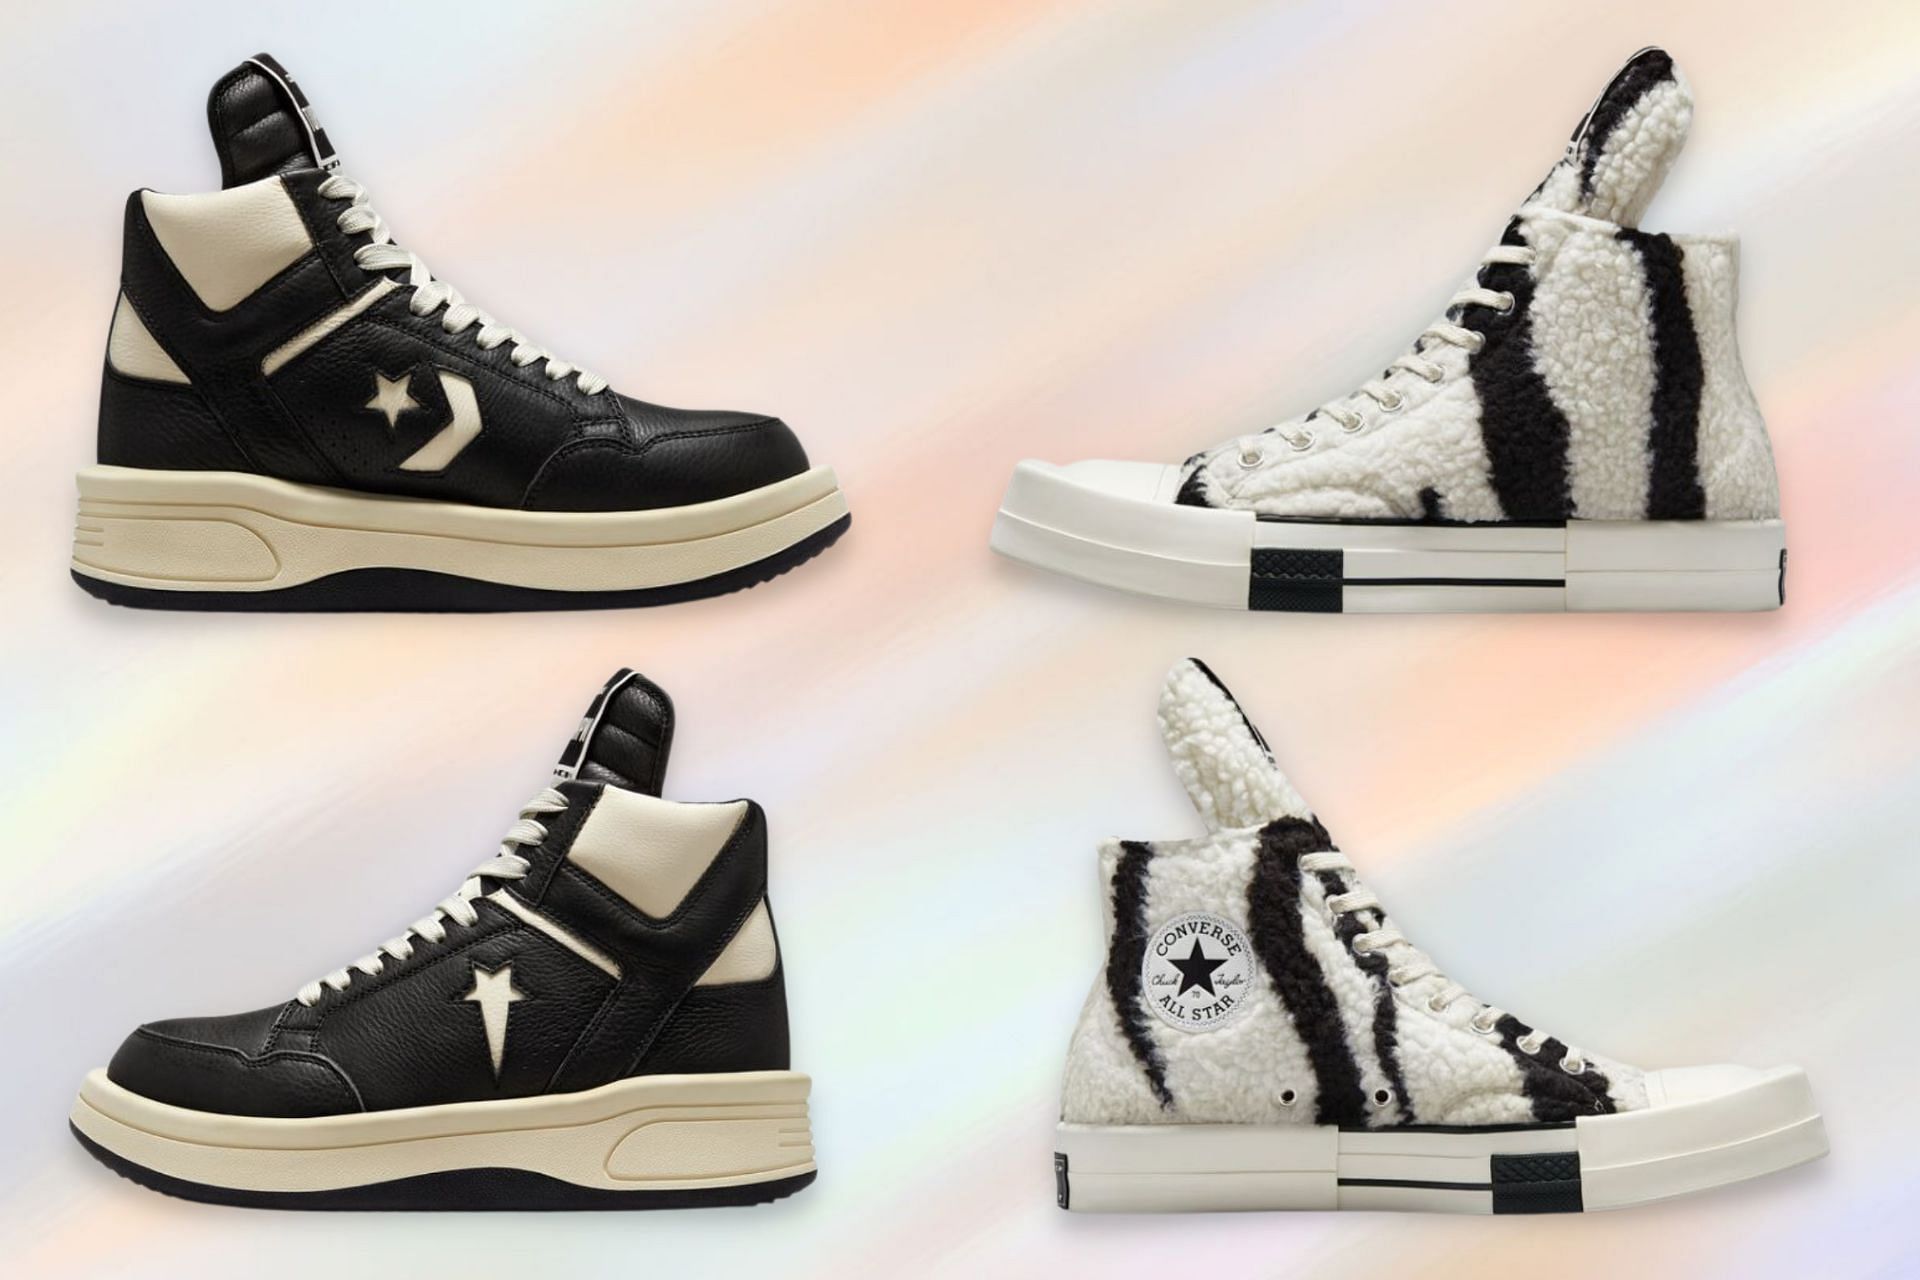 The upcoming Converse x Rick Owens DRKSHDW collection features Chuck 70 and Weapon sneaker model alongside two backpacks (Image via Sportskeeda)